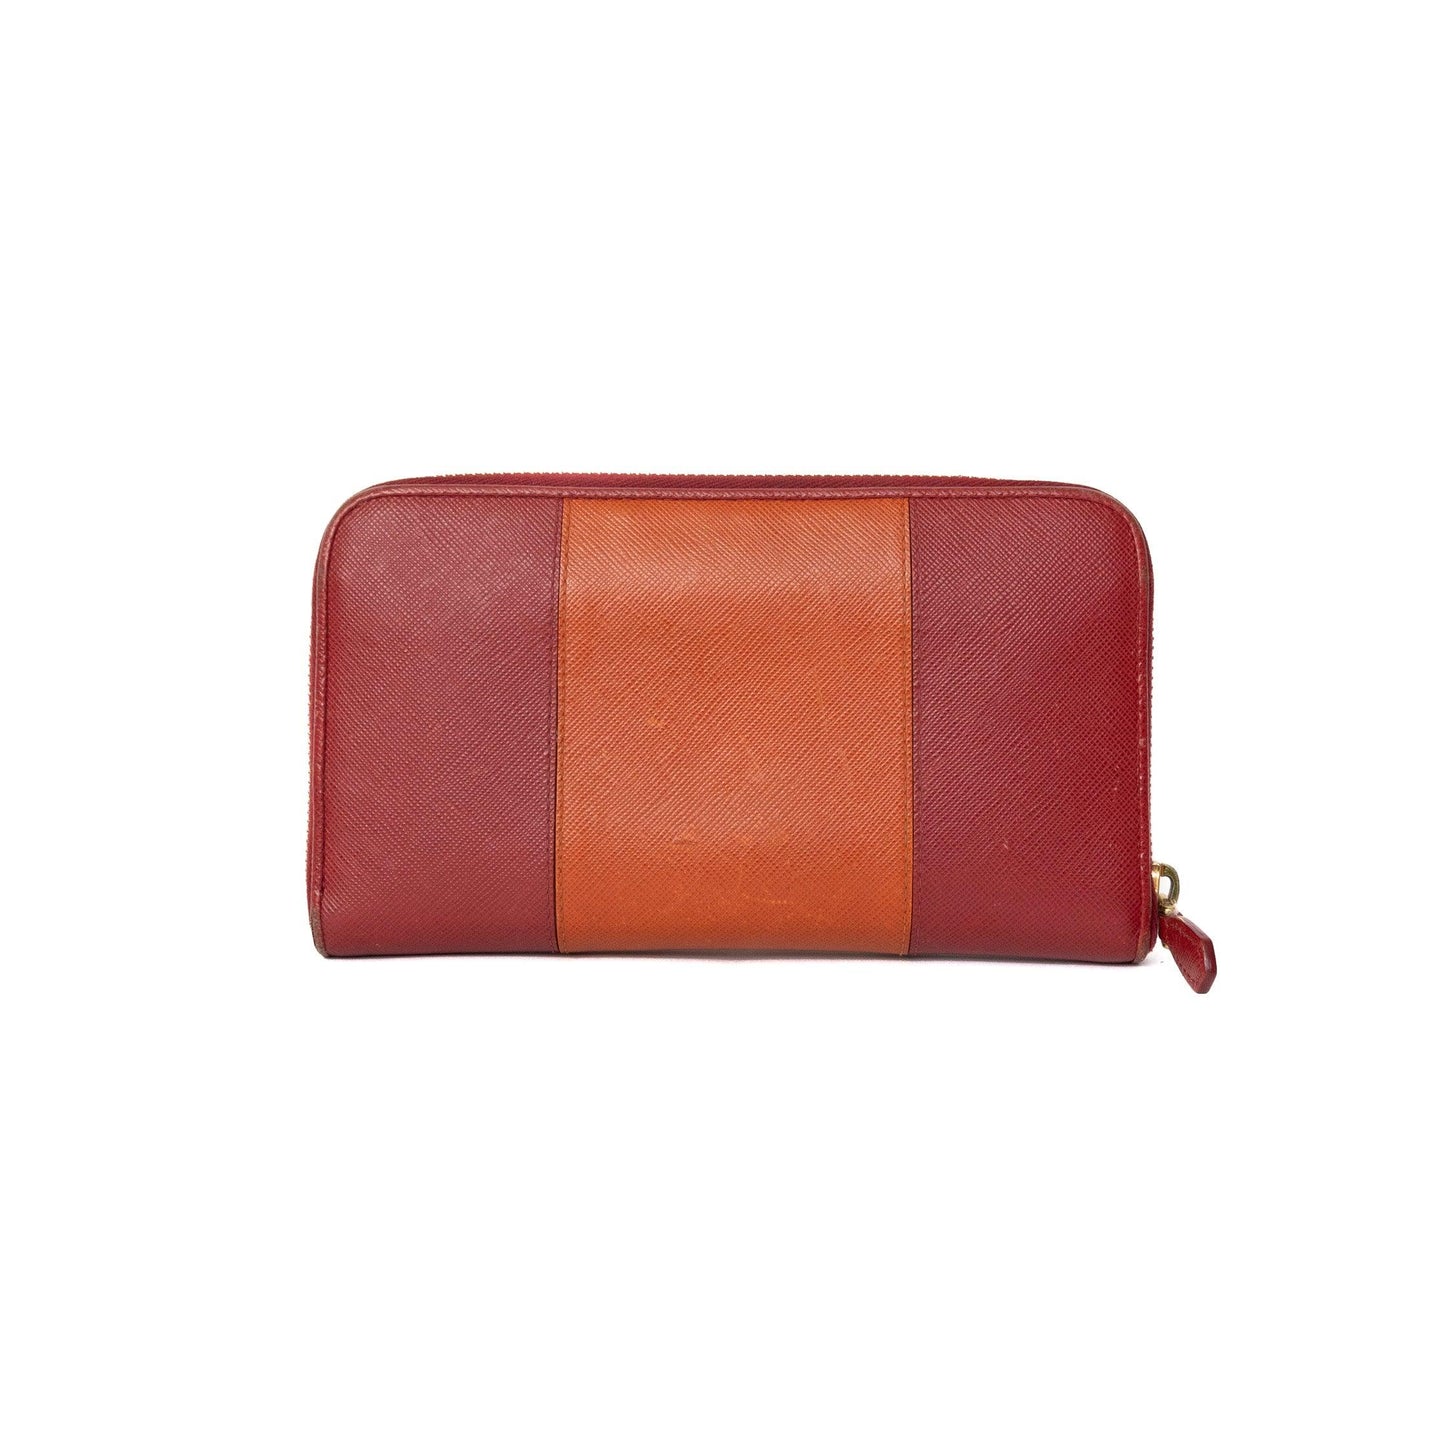 Prada Textured Leather Two-Tone Purse - Known Source